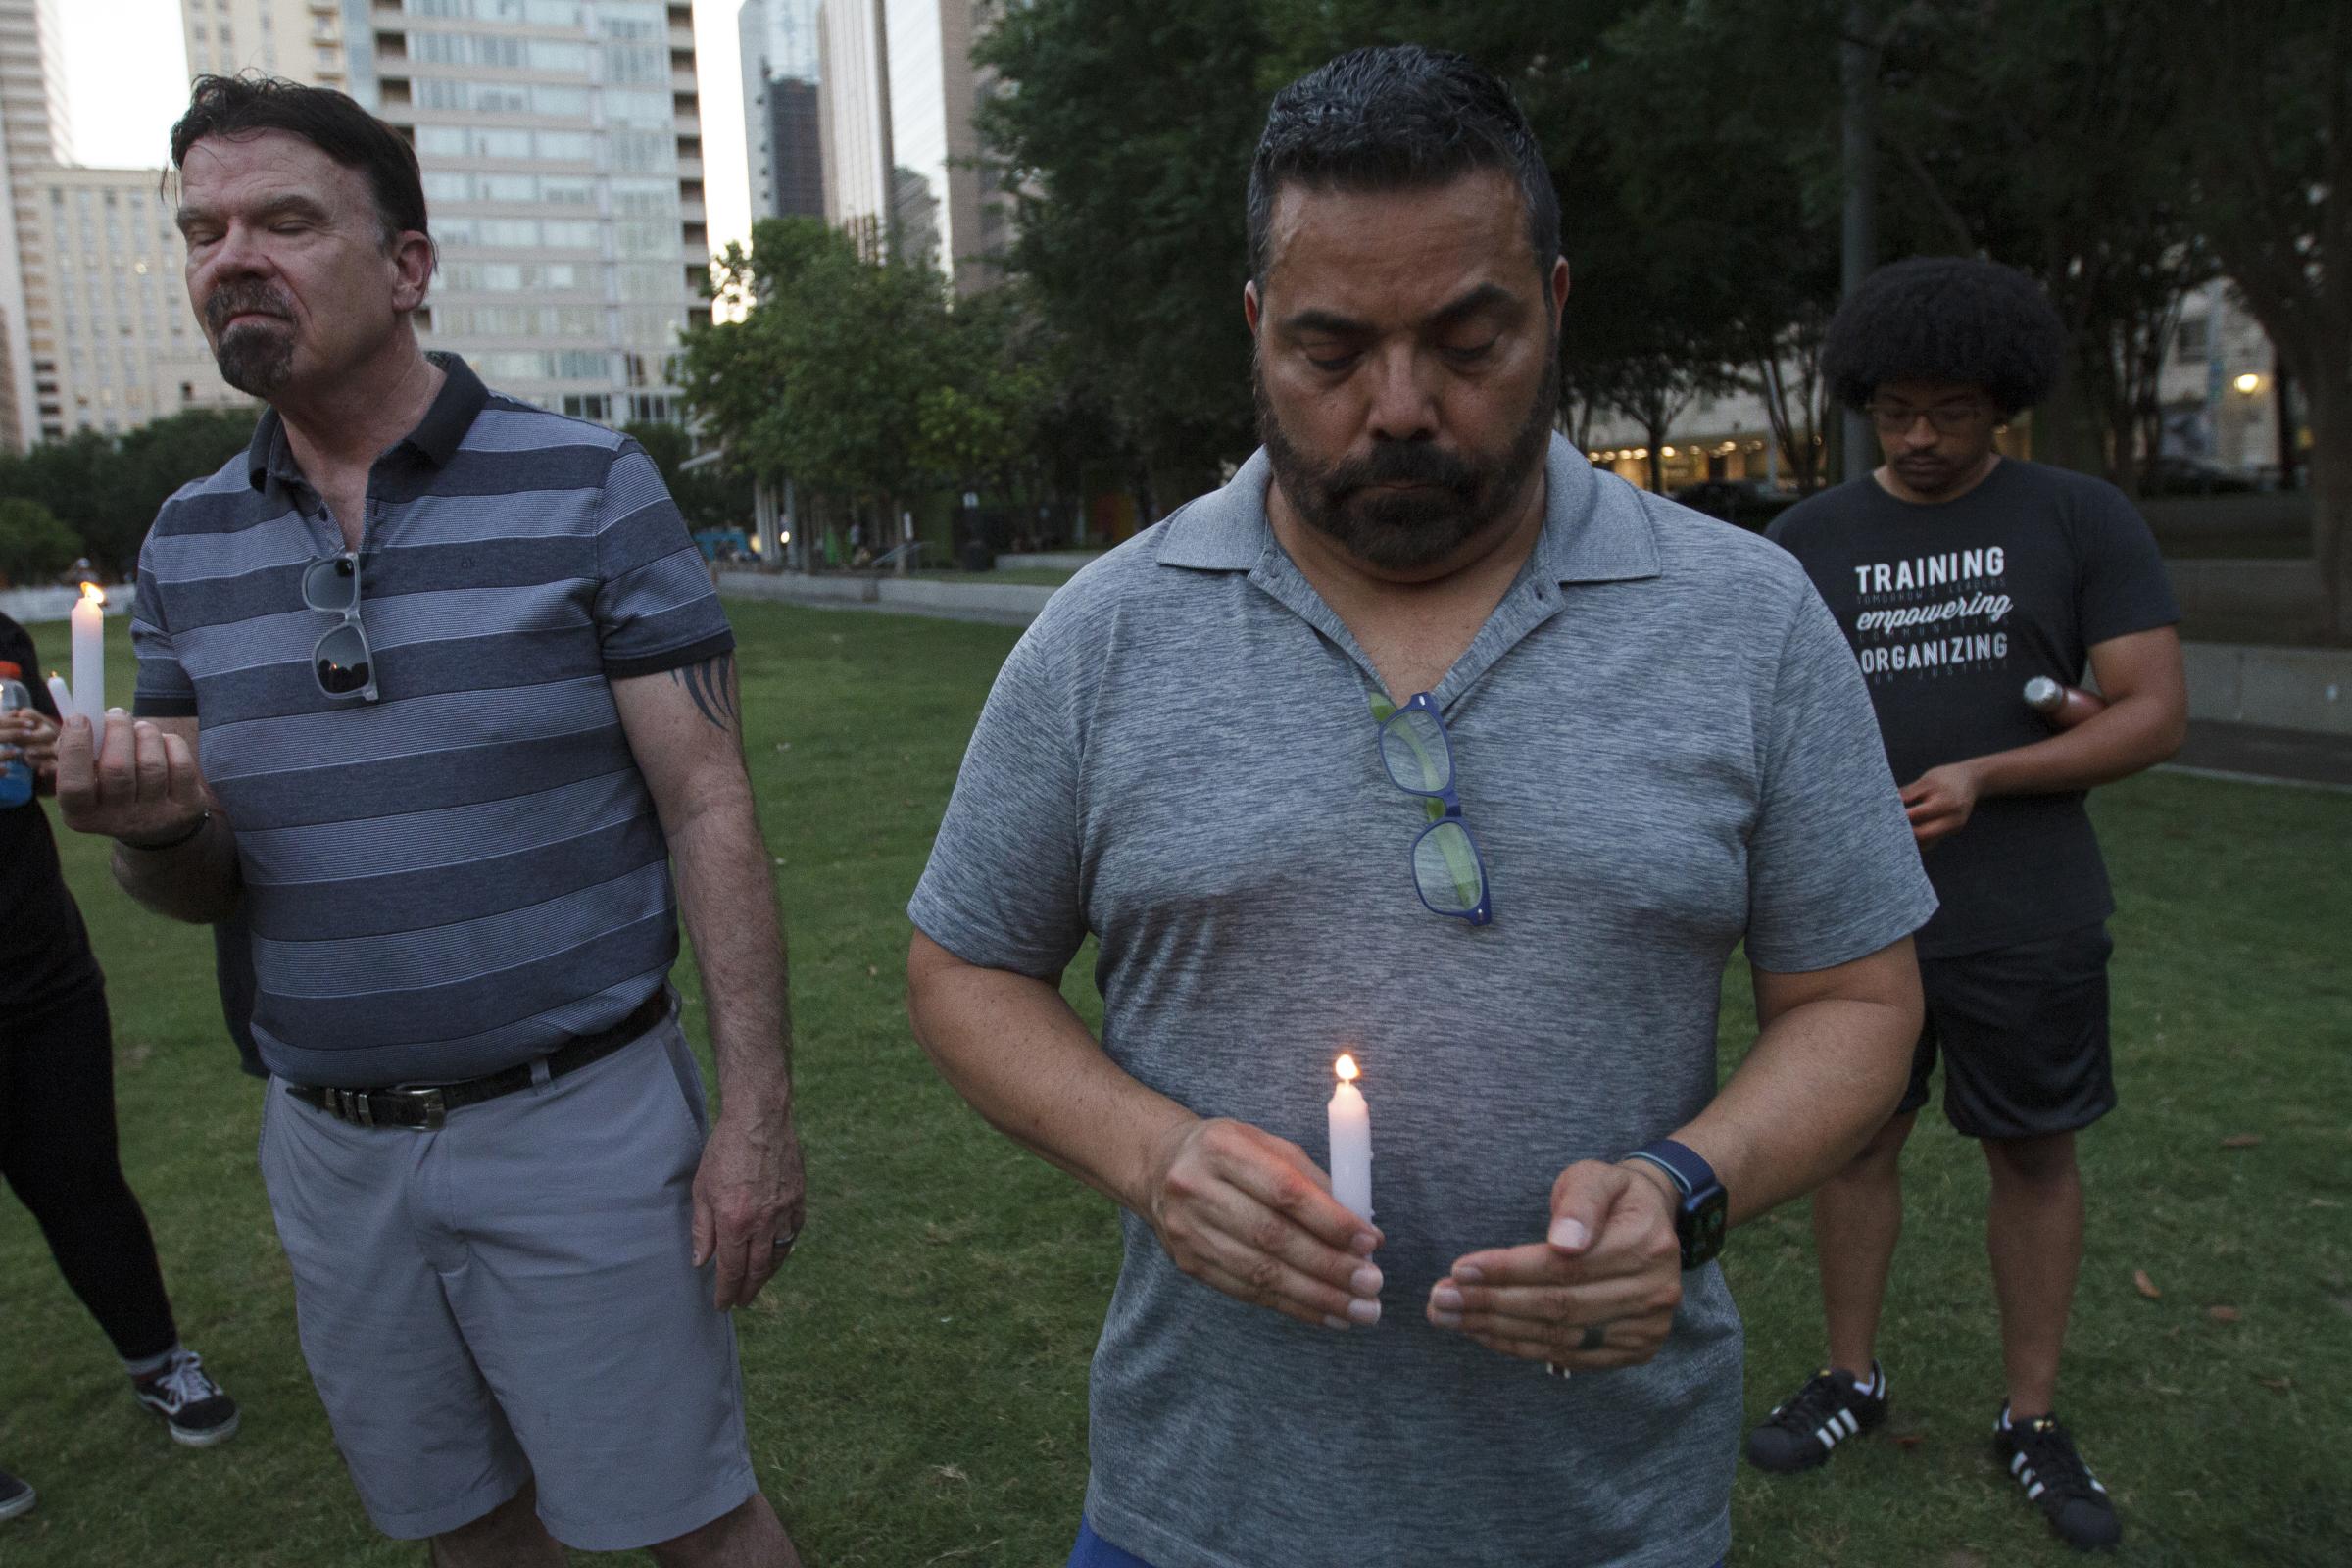 Candlelight Vigil for the Buffalo and Uvalde gun violence victims - David Weinerth (left) and John Gutierrez hold lit candles during the candlelight vigil in honor...